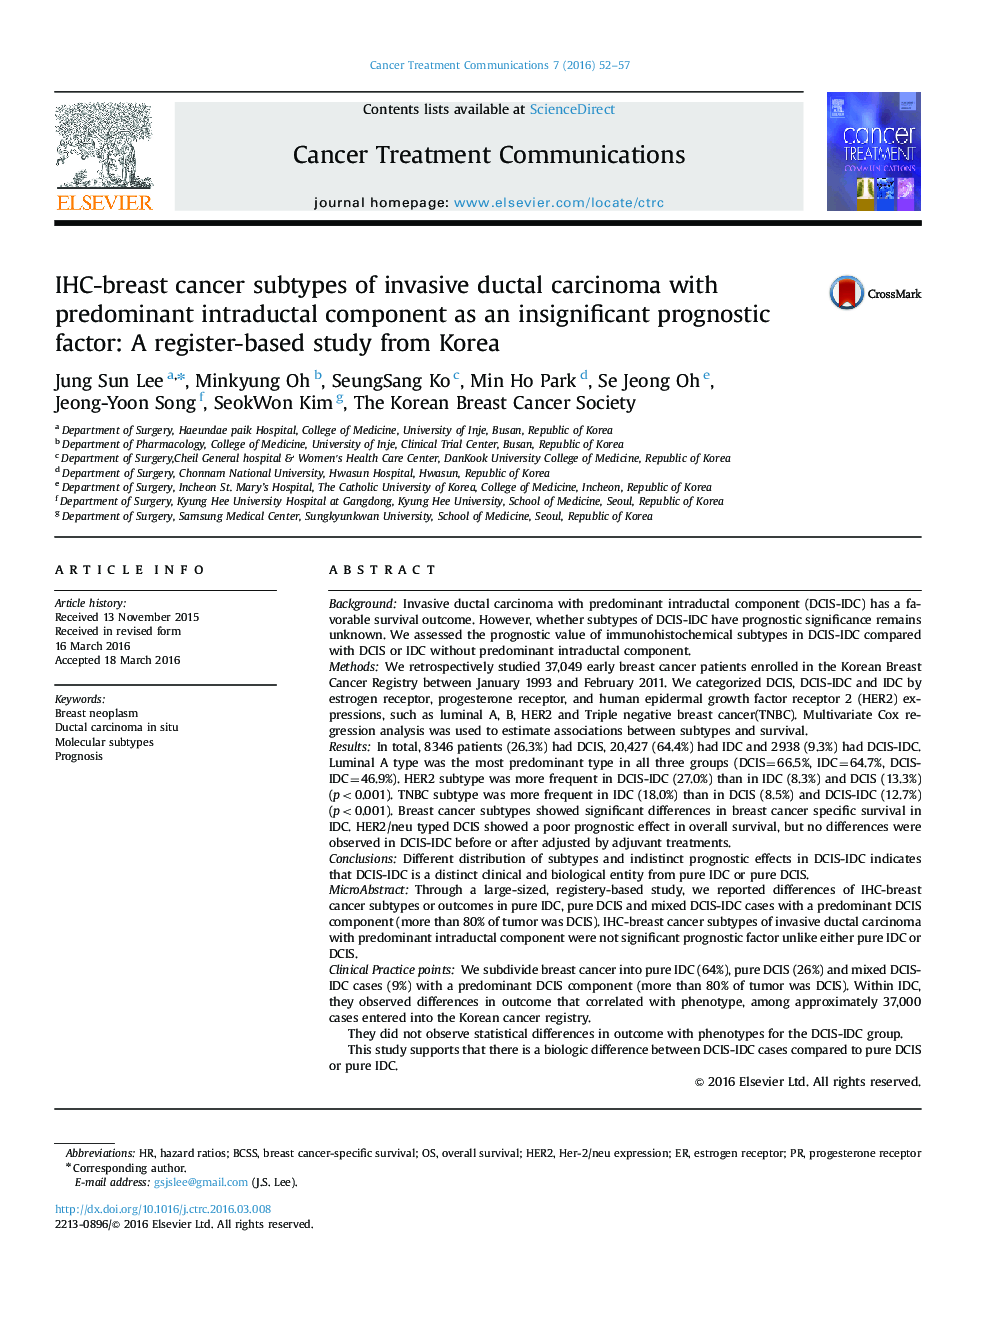 IHC-breast cancer subtypes of invasive ductal carcinoma with predominant intraductal component as an insignificant prognostic factor: A register-based study from Korea